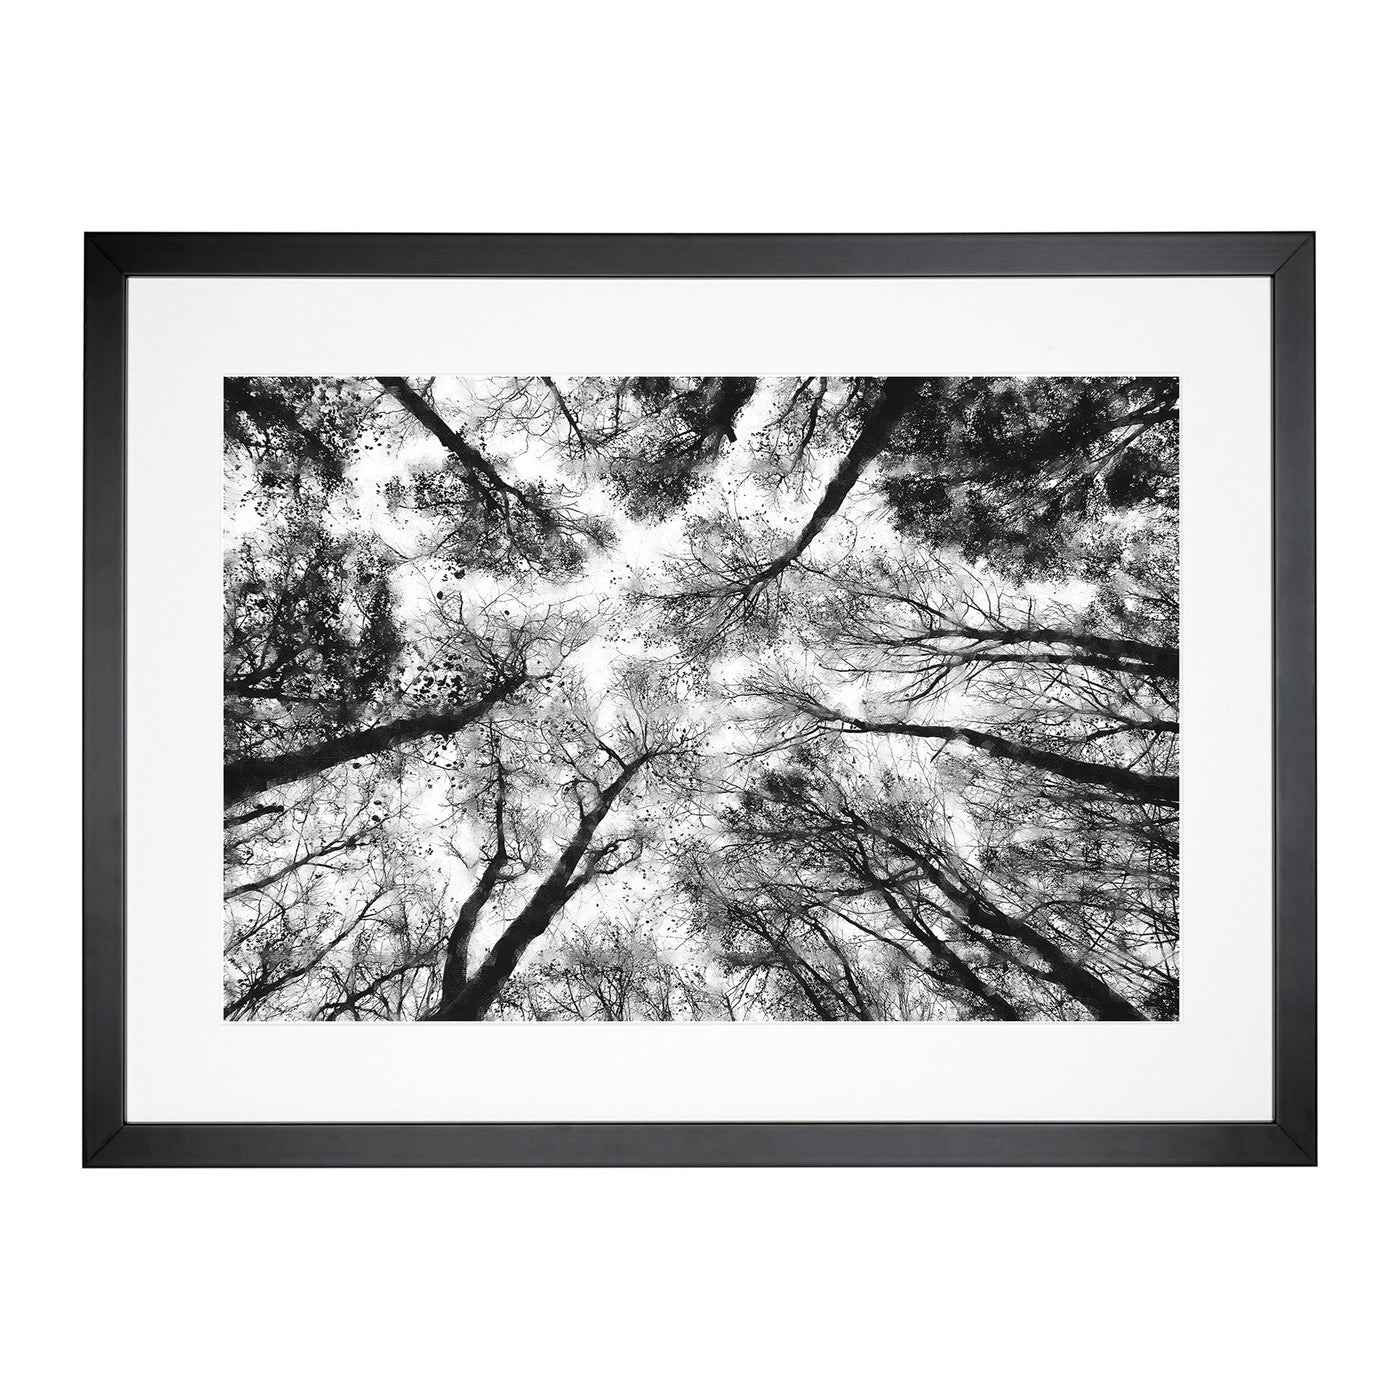 Vaulted Tree Branches